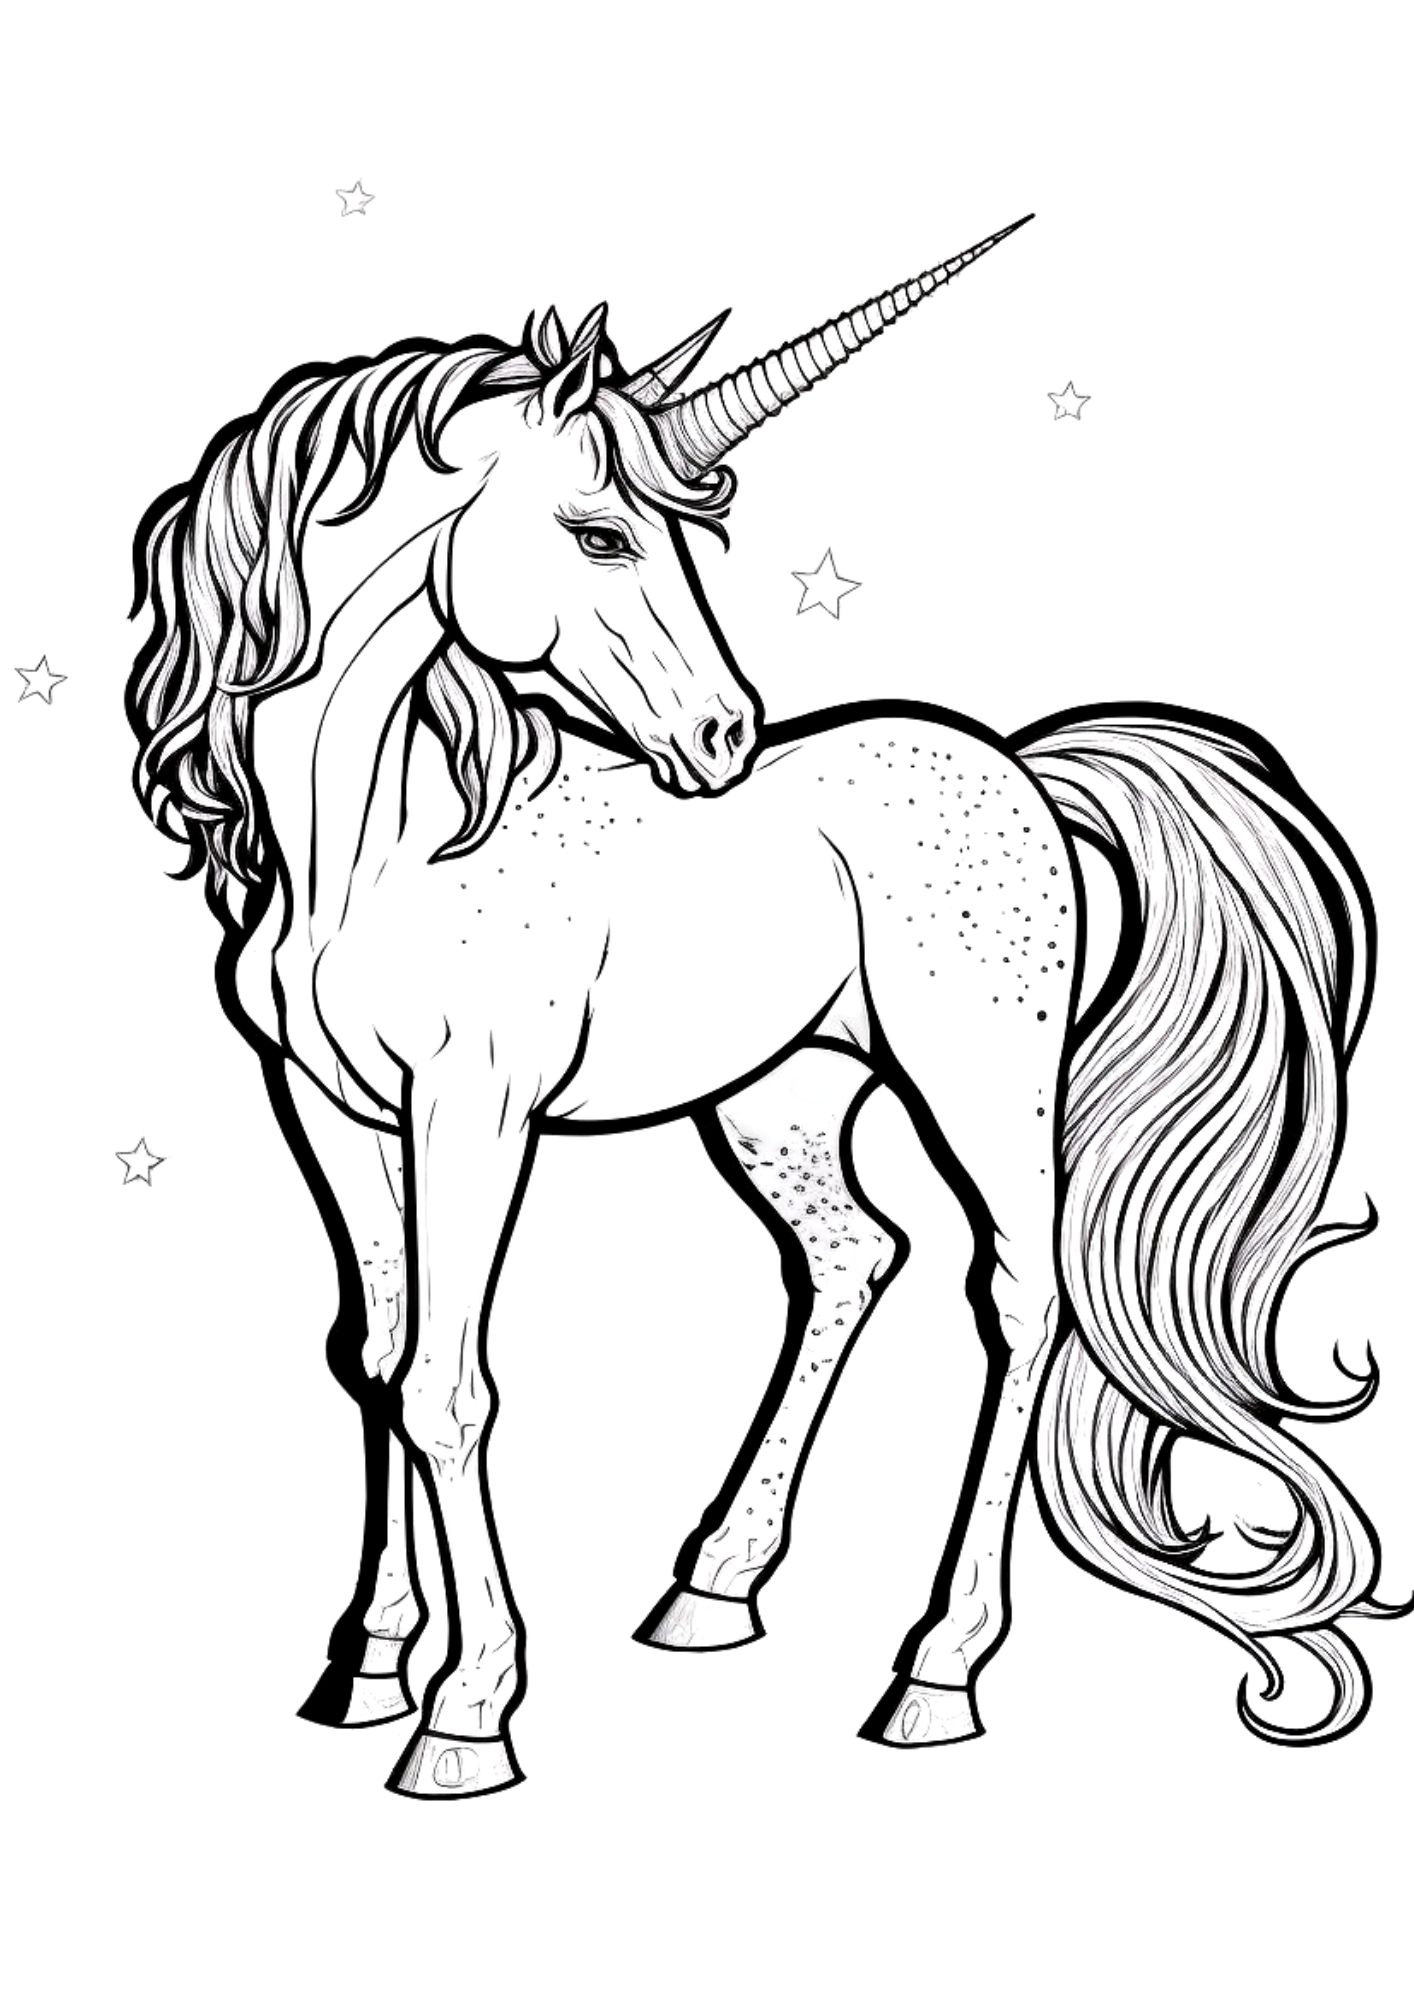 Magical unicorn coloring pages to download and print